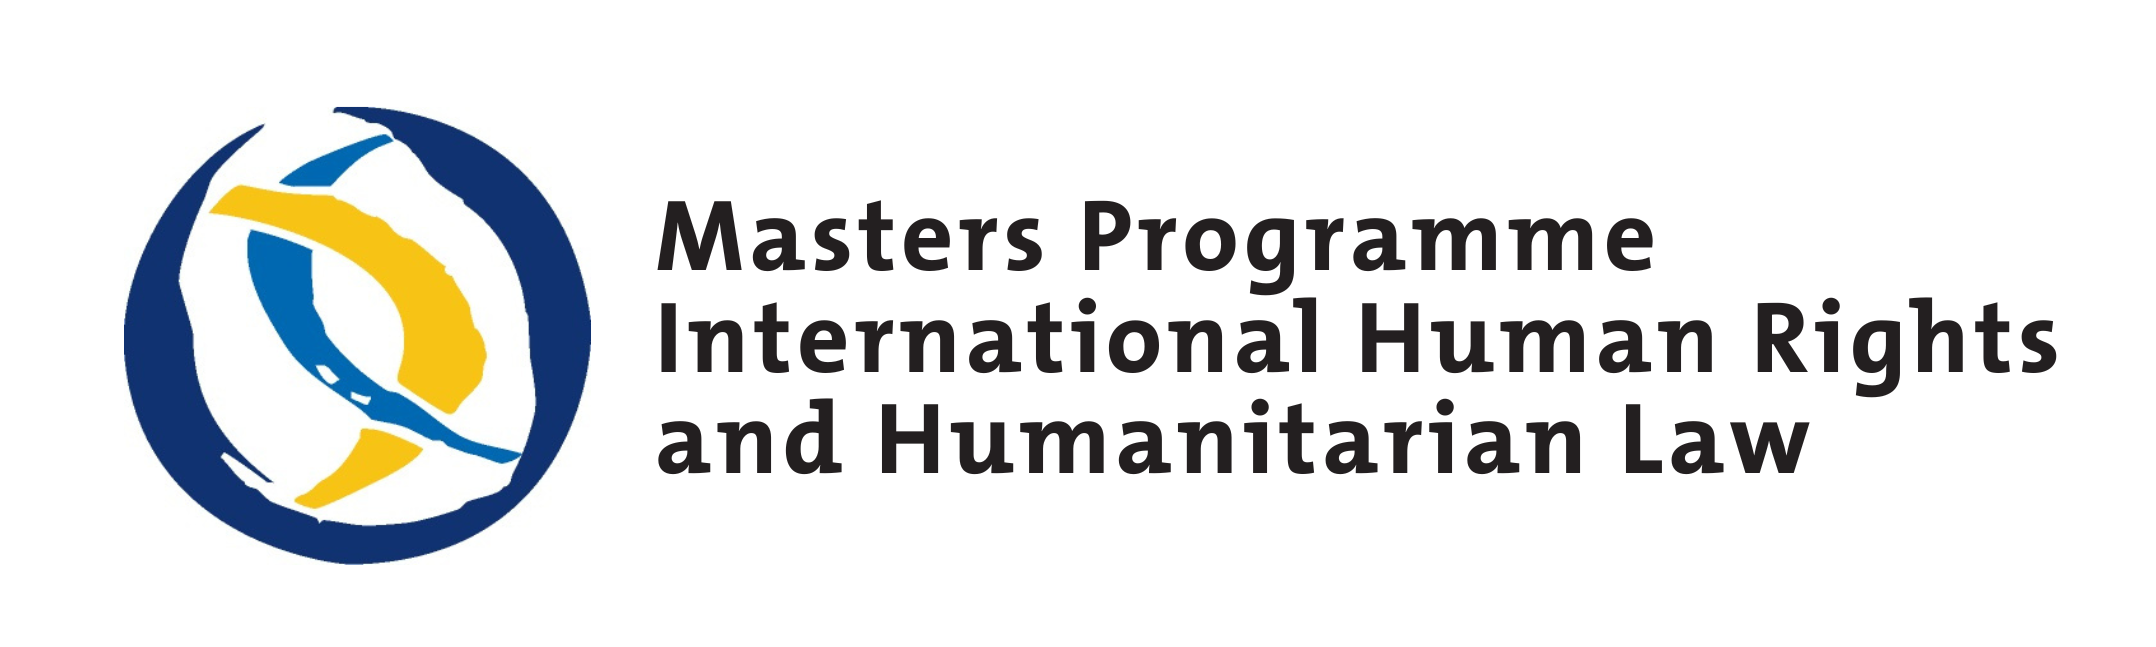 Masters Programme International Human Rights And Humanitarian Law (3 x 1 in) (2.5 x 0.75 in)